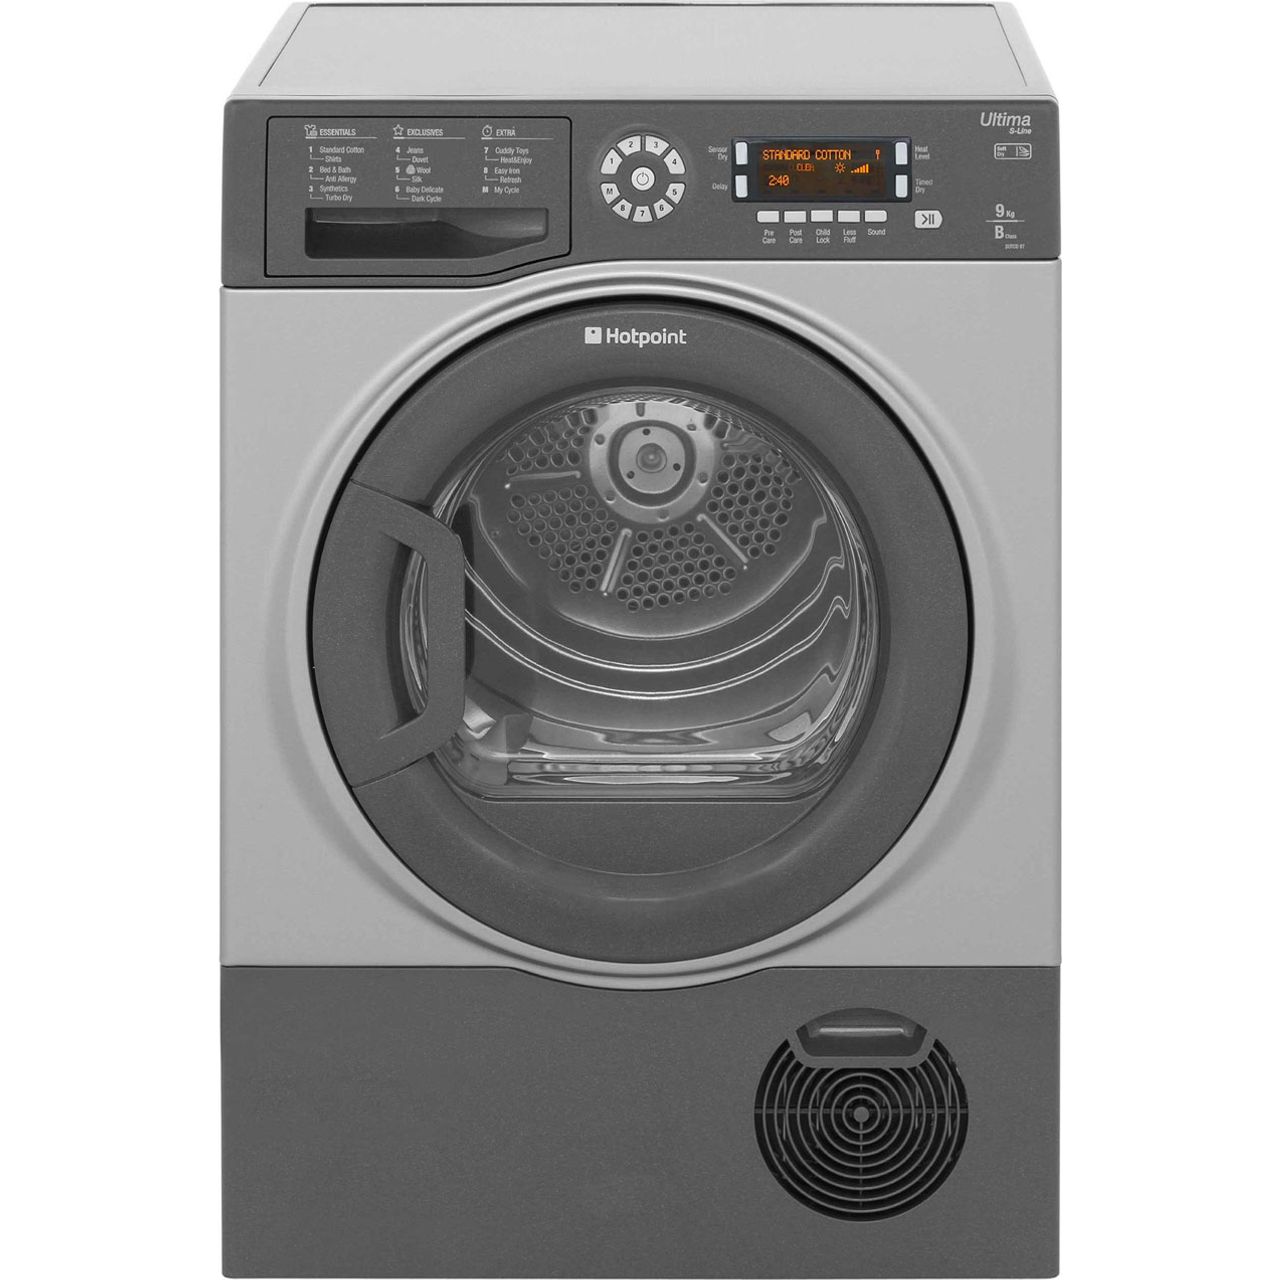 Hotpoint Ultima S-Line SUTCD97B6GM 9Kg Condenser Tumble Dryer Review